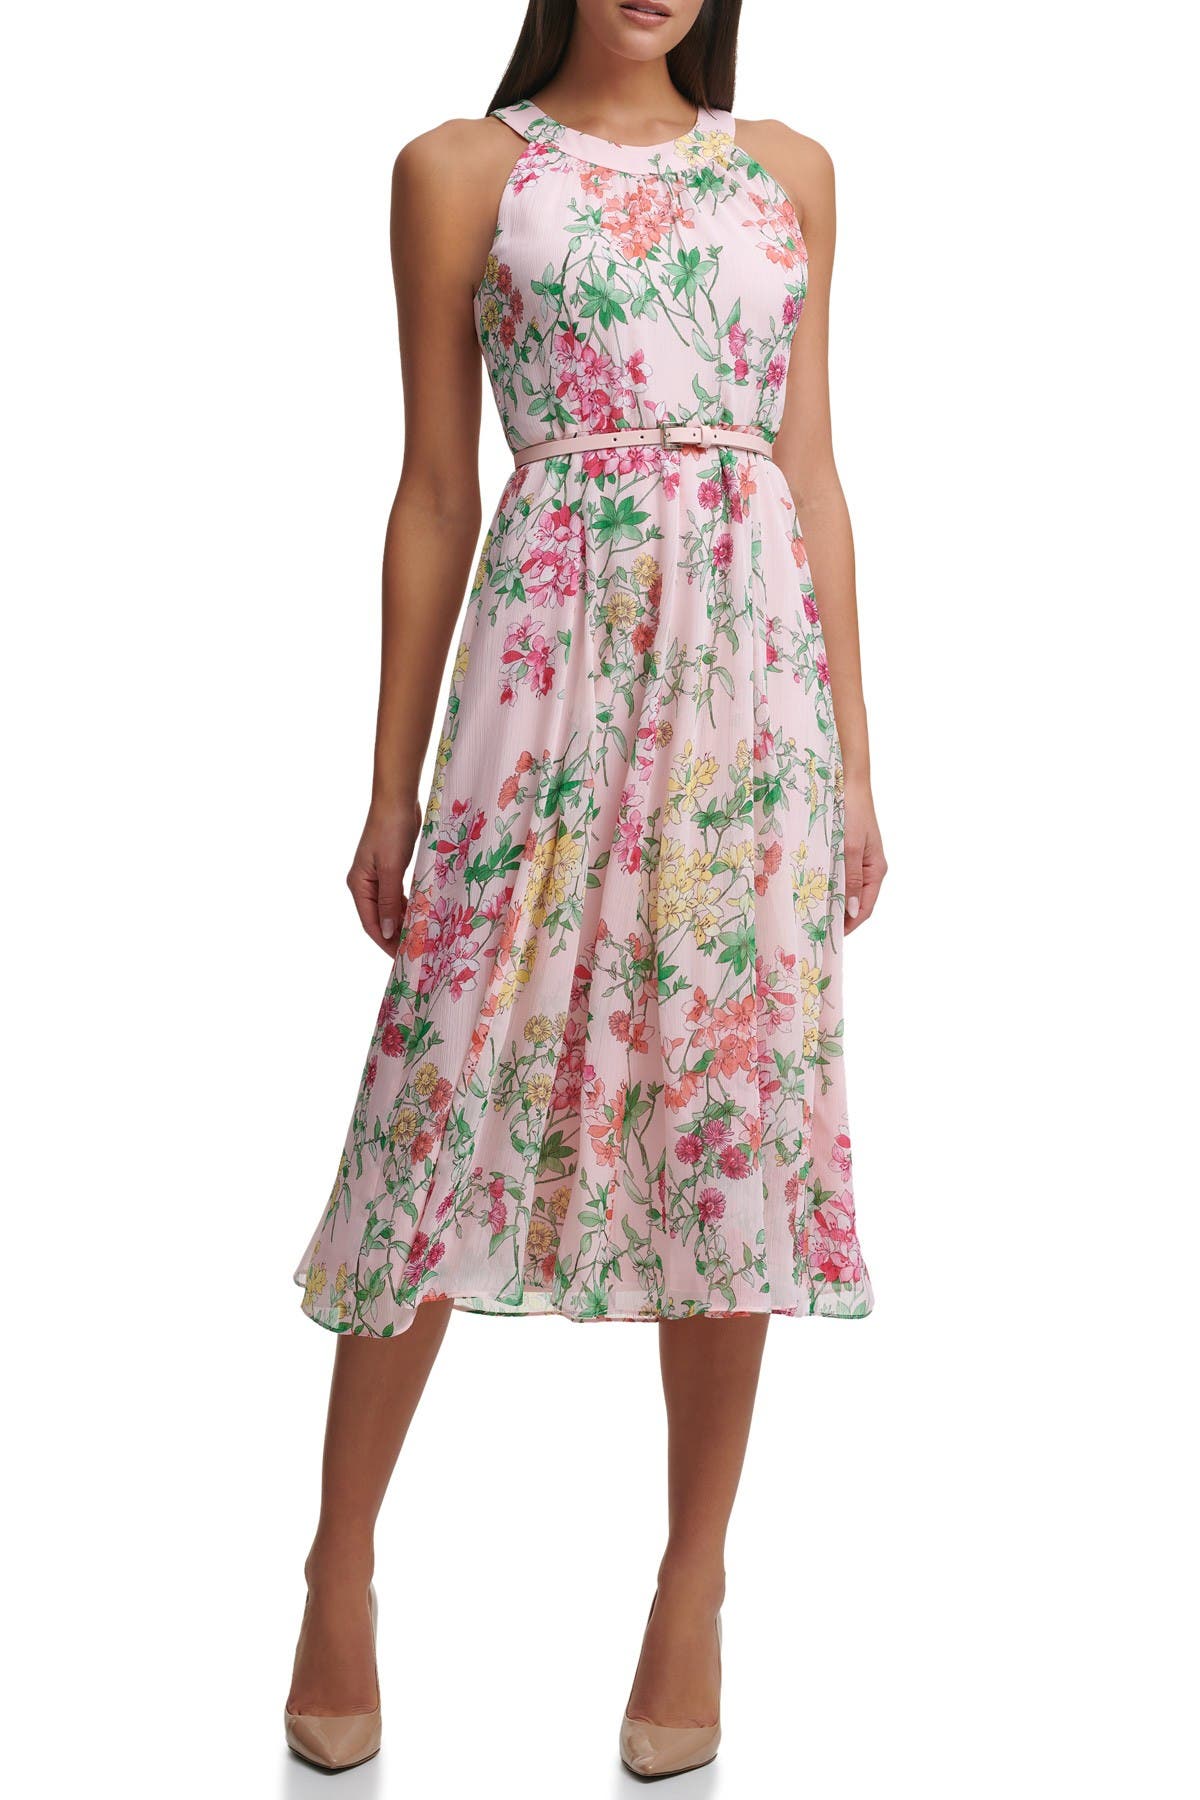 Tommy Hilfiger Sleeveless Diana Floral ...